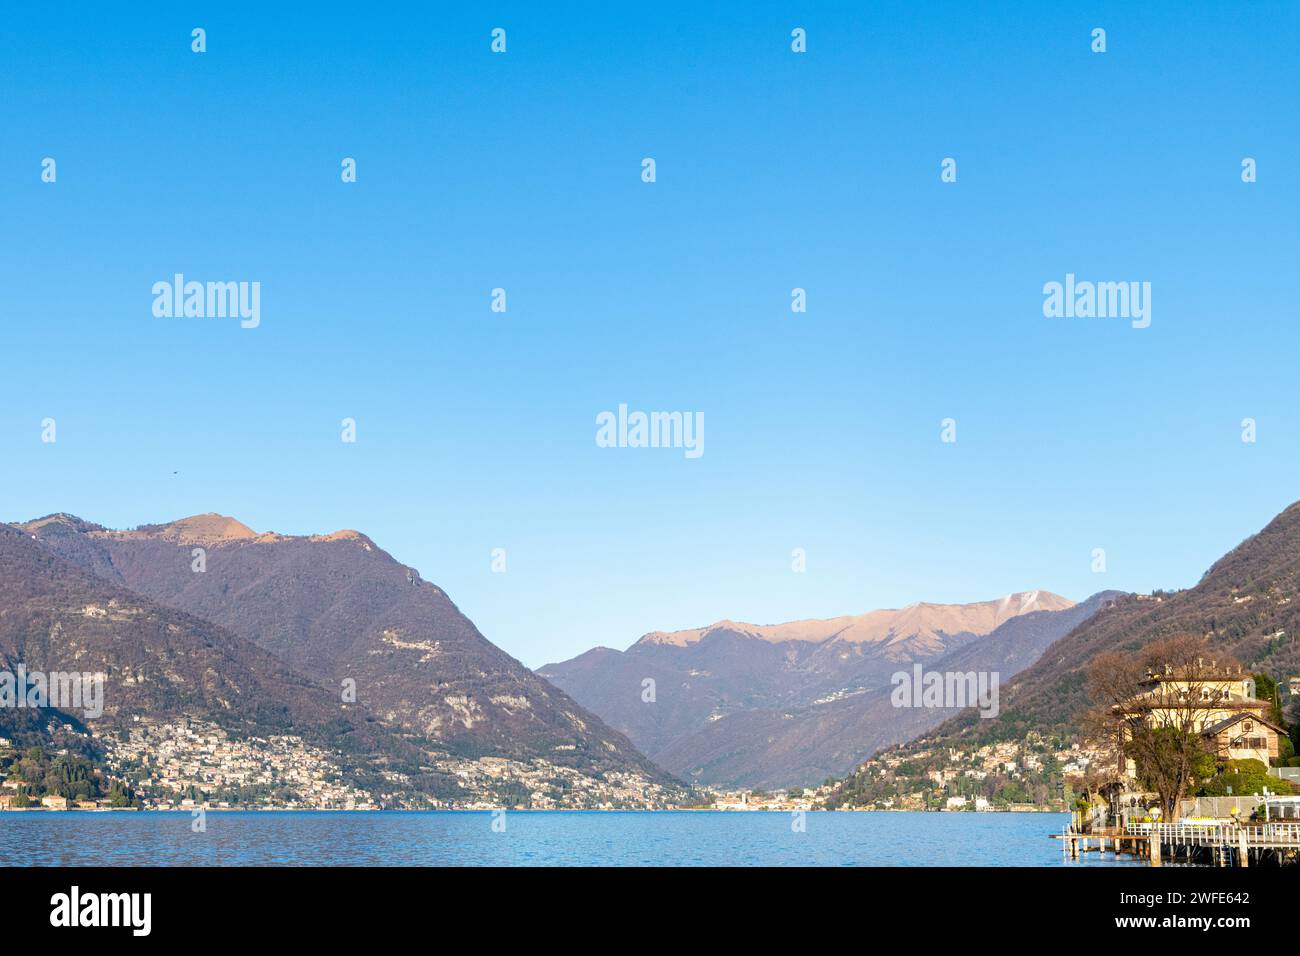 A view of the mountains and valley of Lake Como in the Alps in Italy Stock Photo